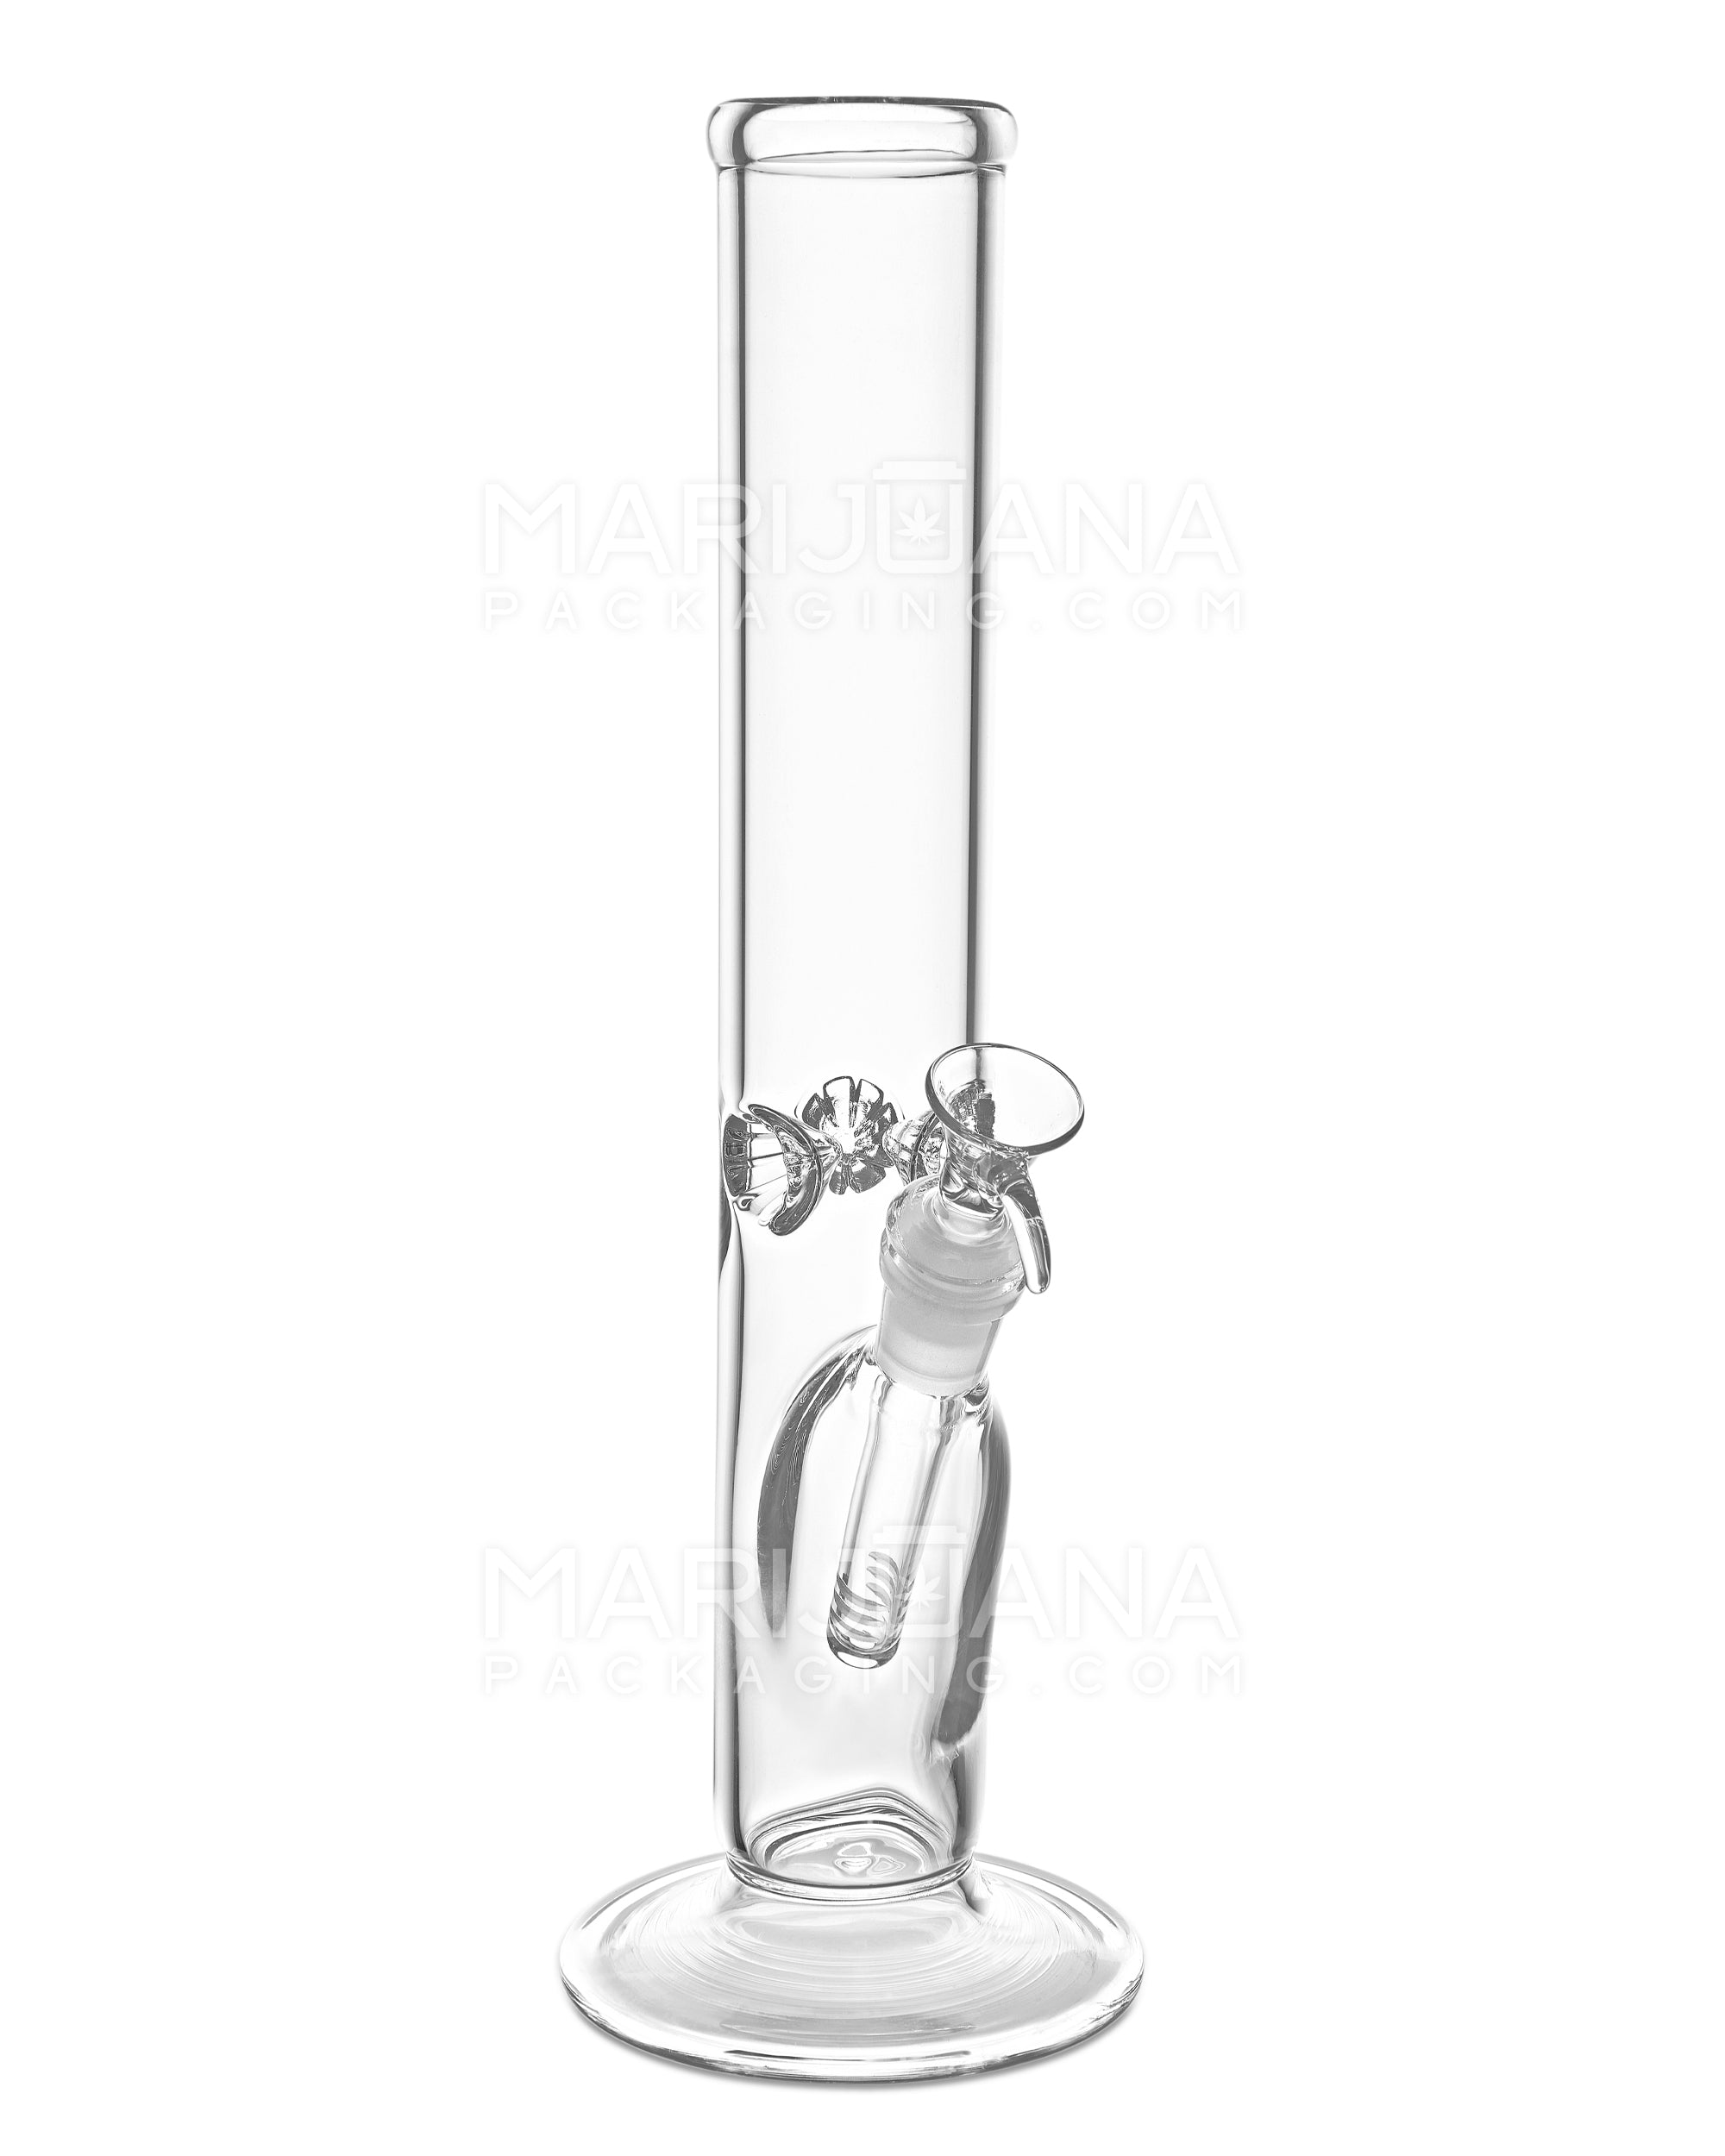 USA Glass | Straight Glass Water Pipe w/ Ice Catcher | 12in Tall - 18mm Bowl - Clear - 2